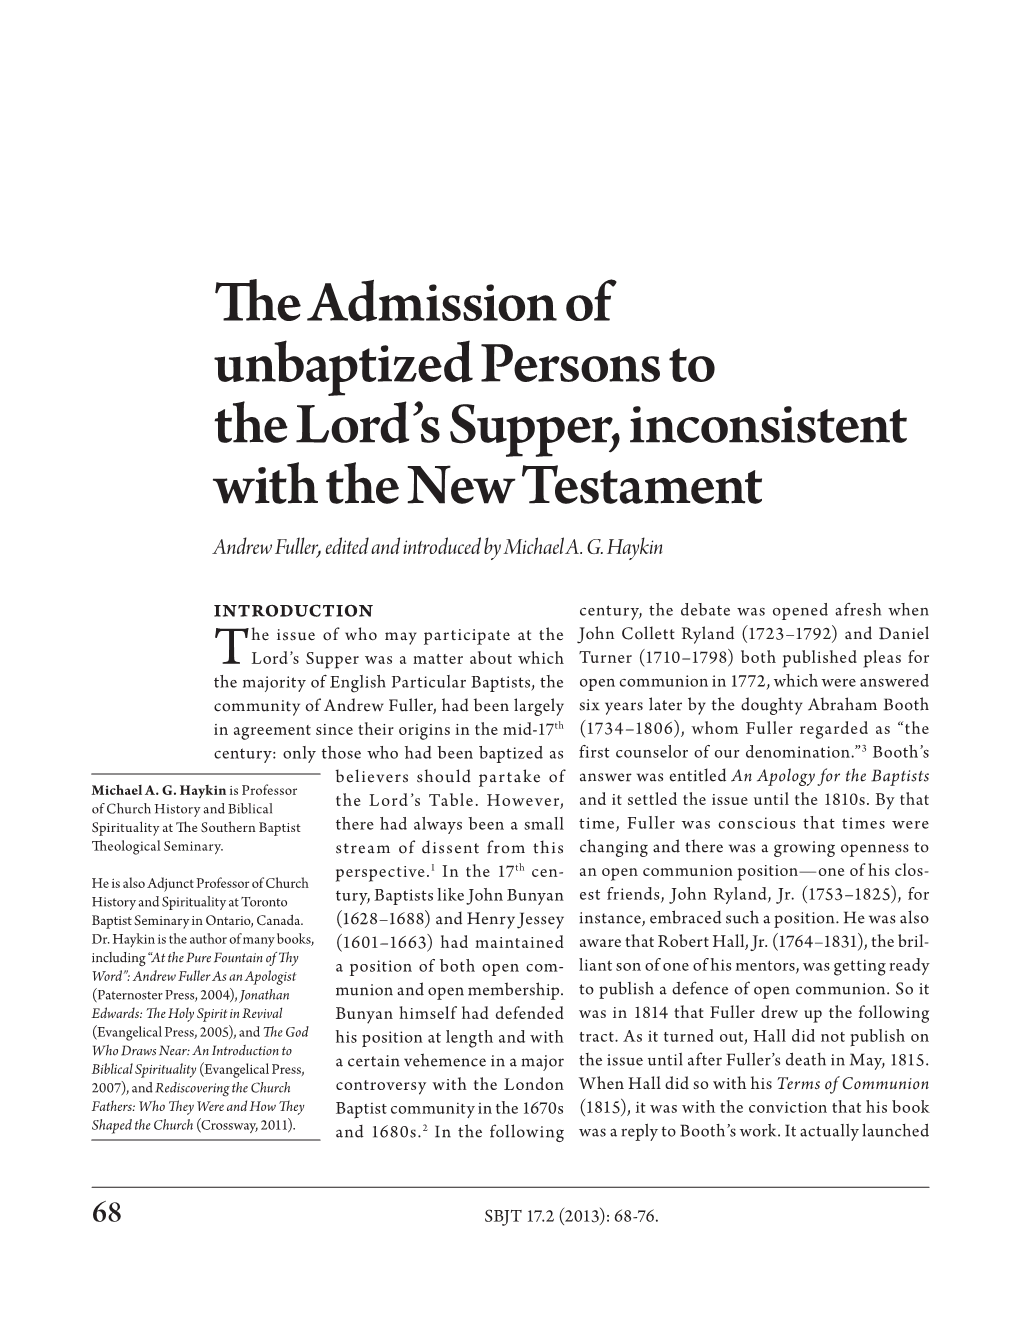 The Admission of Unbaptized Persons to the Lord's Supper, Inconsistent